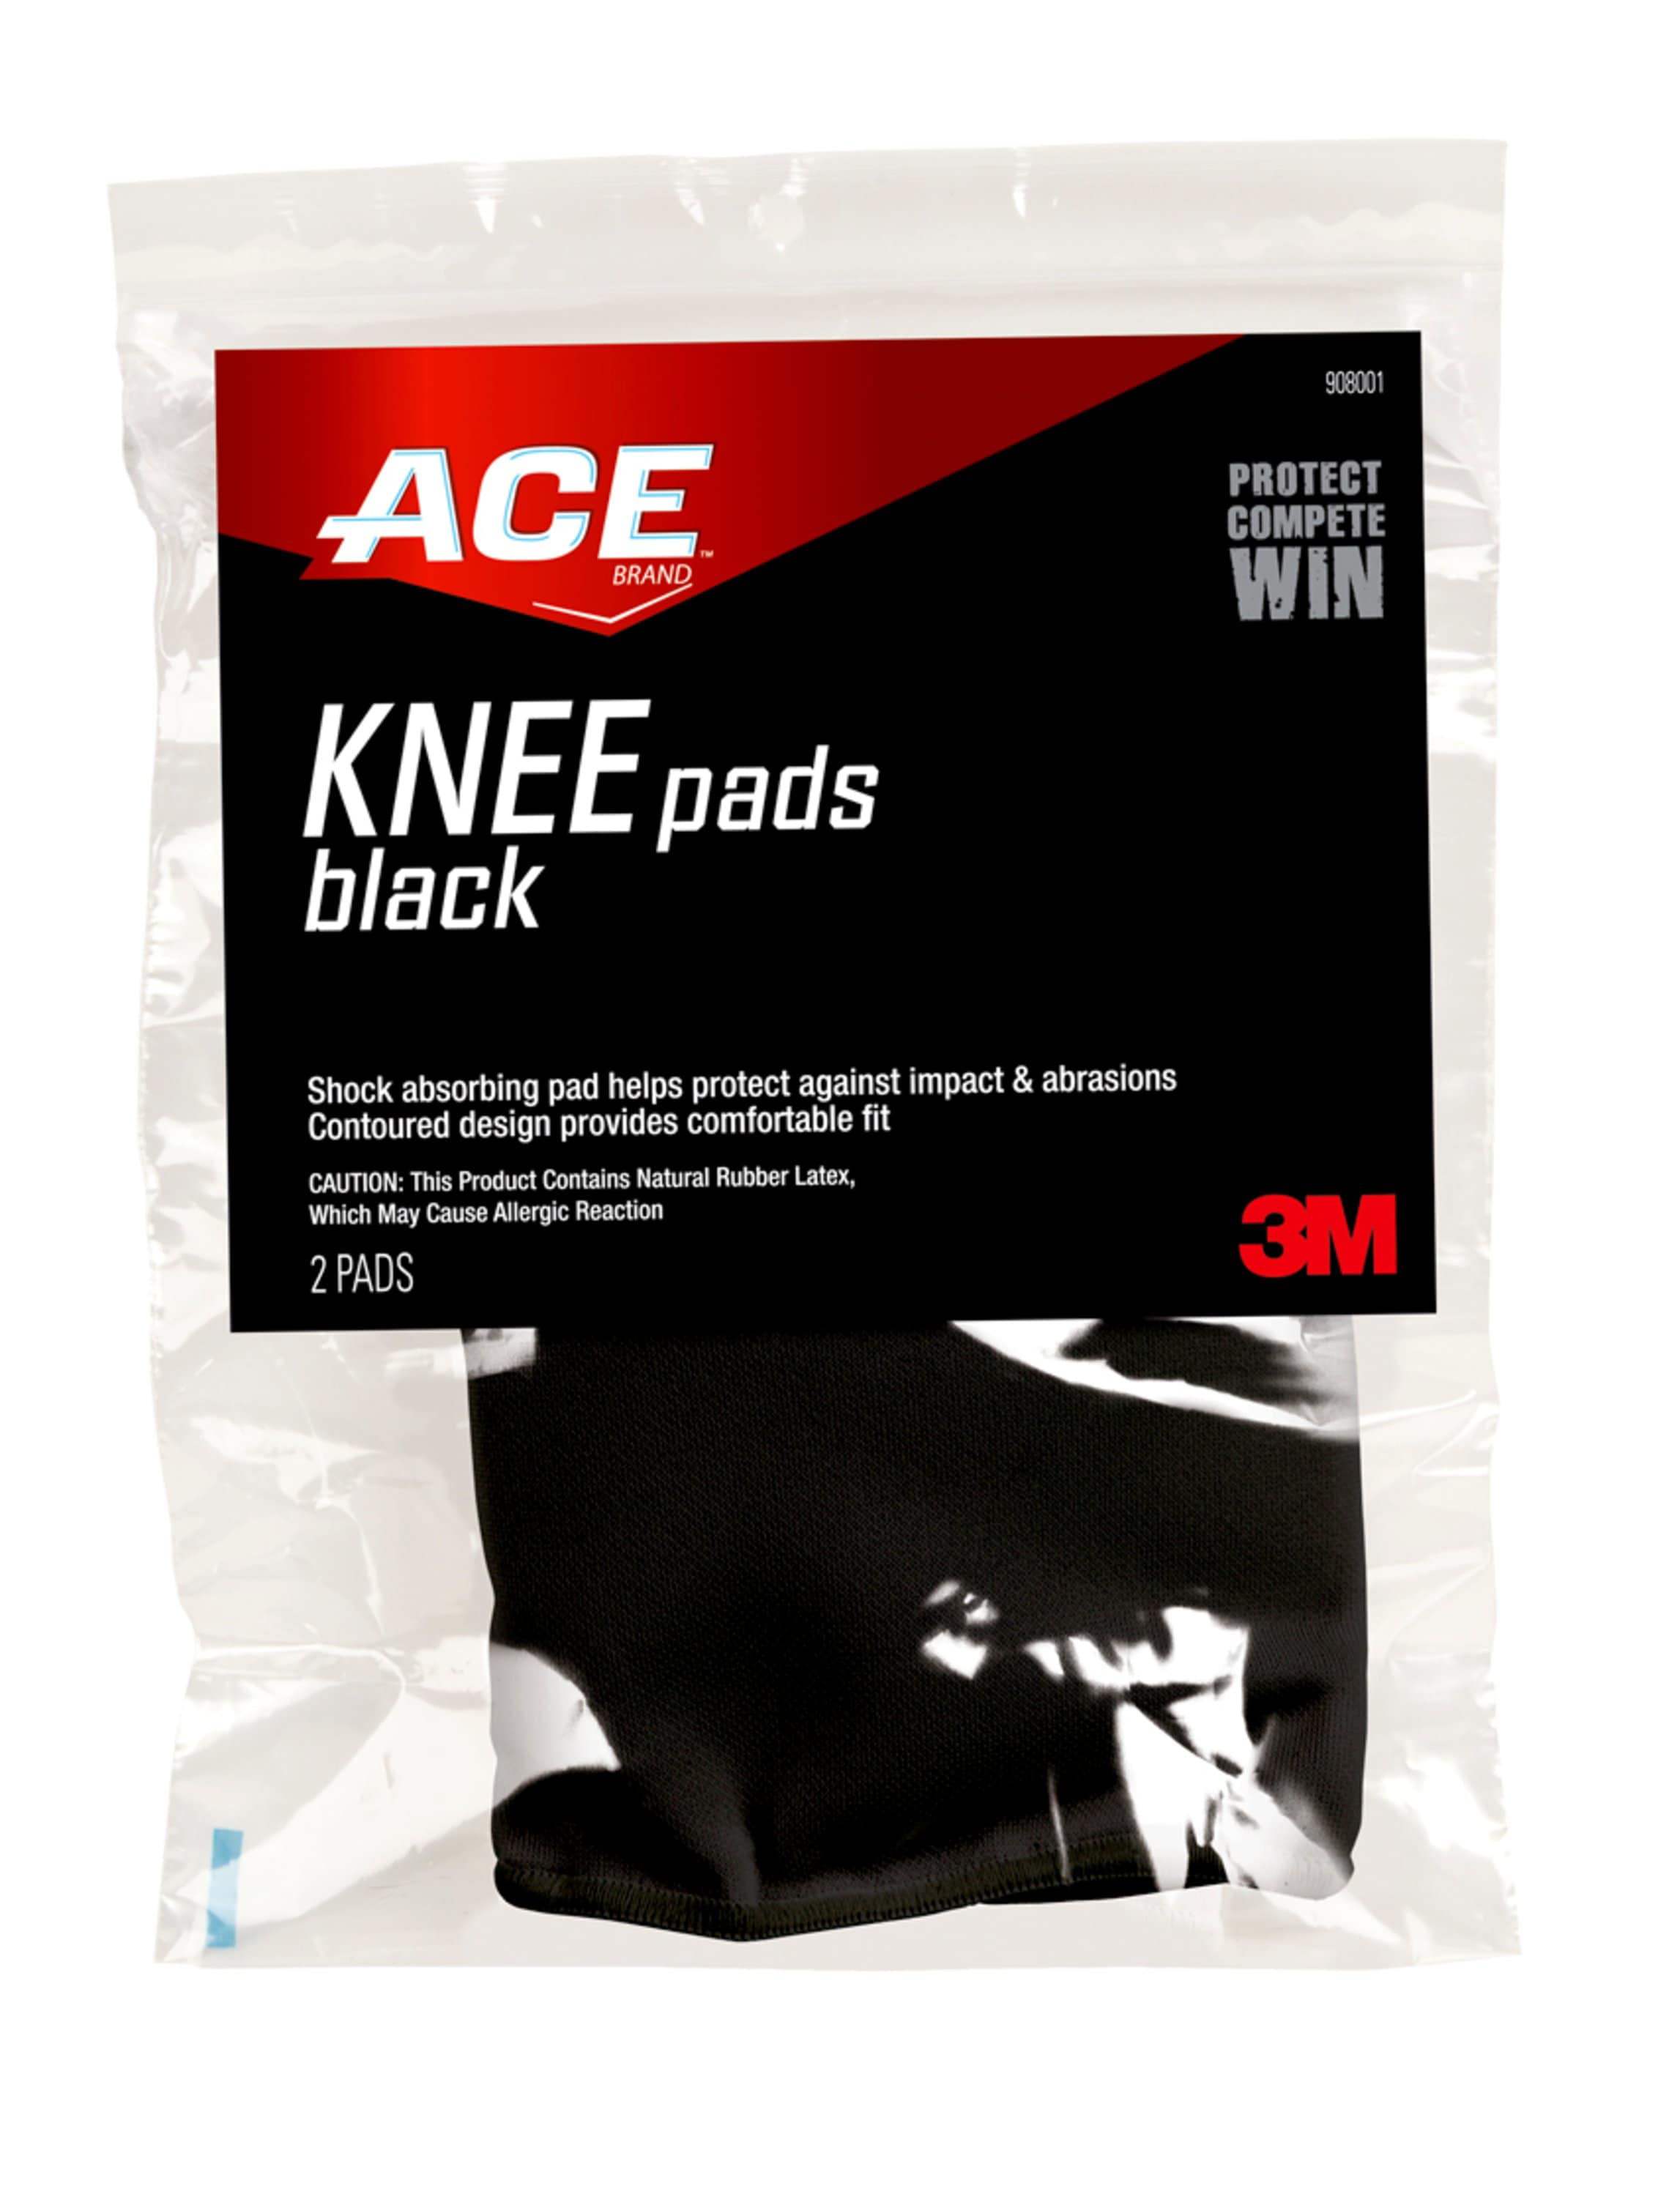 4 Total 3M ACE Knee Pads Black 14-20 Inch LOT OF 2 